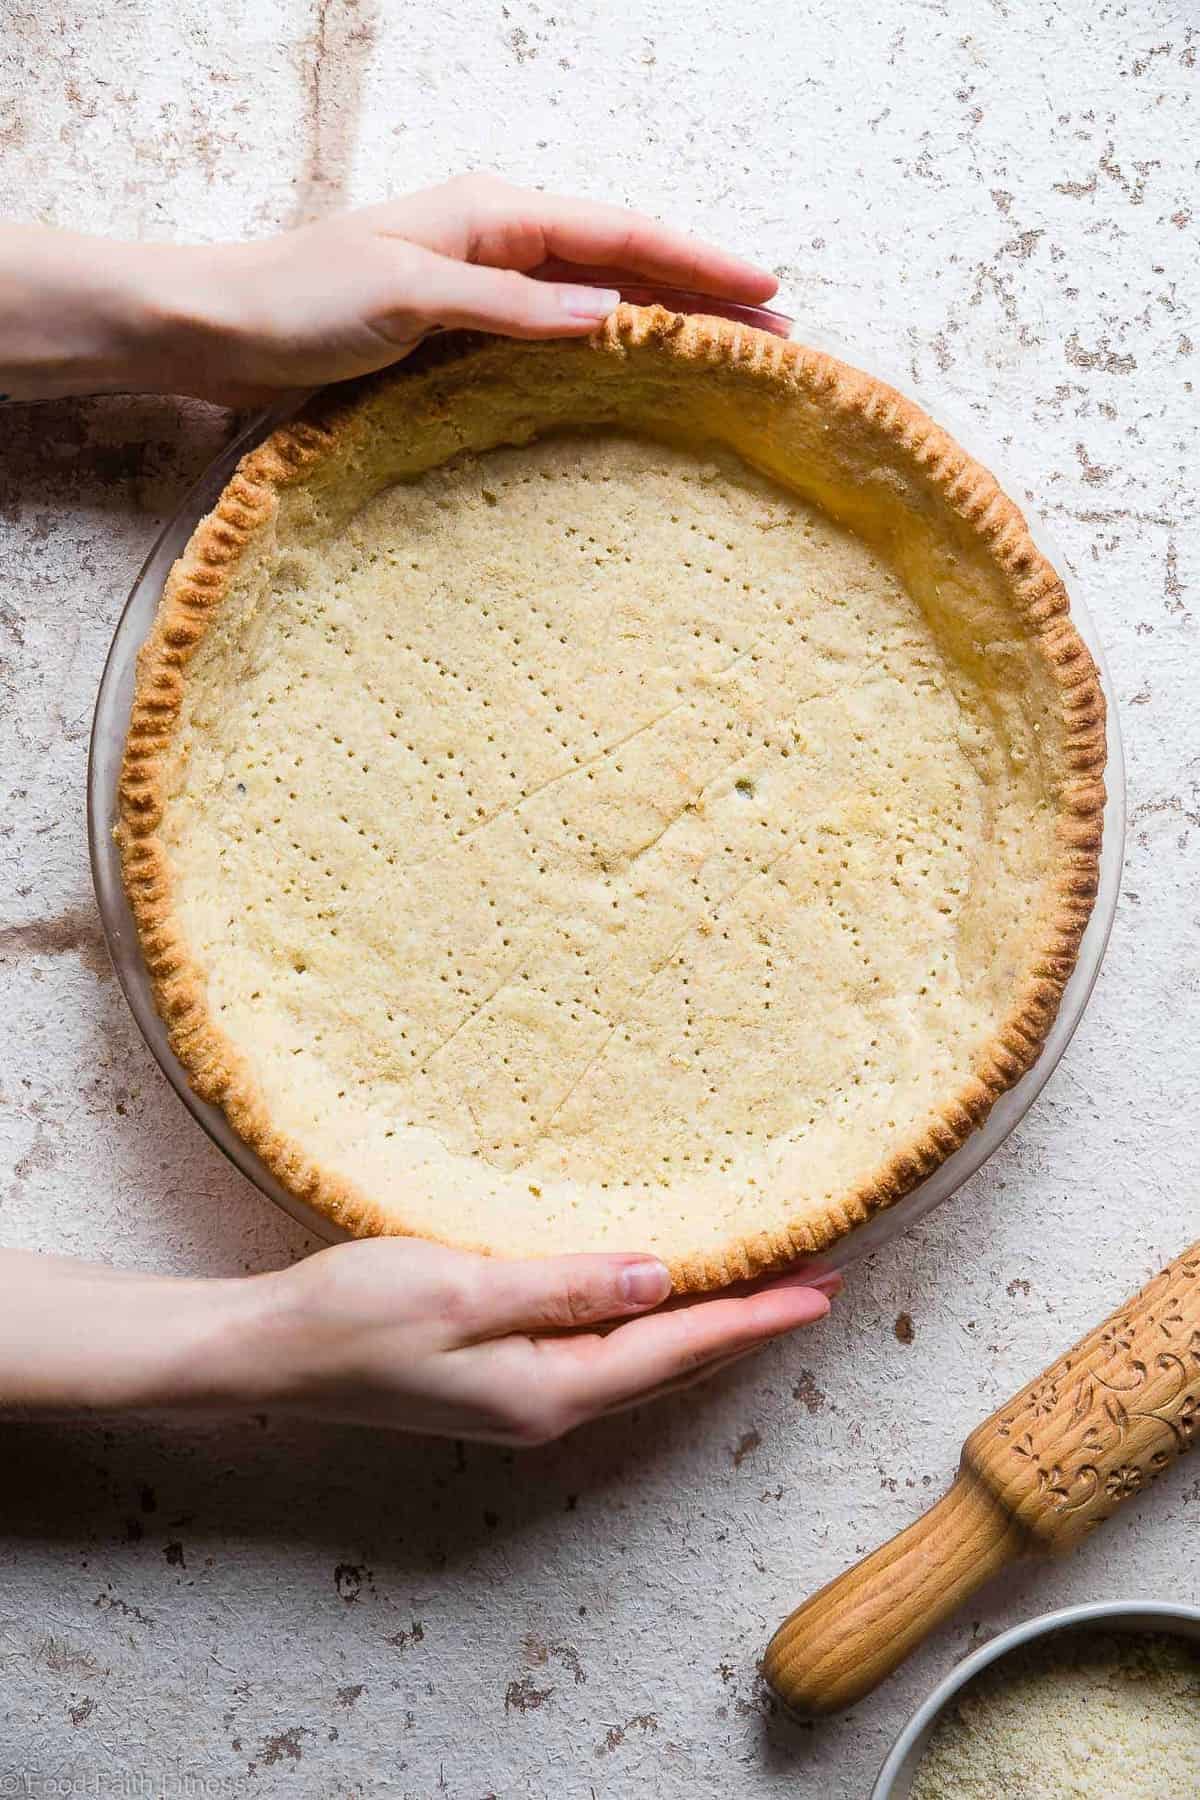 Low Carb Paleo Almond Flour Pie Crust - This is the BEST healthy pie crust ever! So tender, buttery and flaky that you will never know it's gluten free, sugar free and better for you! So easy to make too! | #Foodfaithfitness | #Glutenfree #paleo #lowcarb #healthy